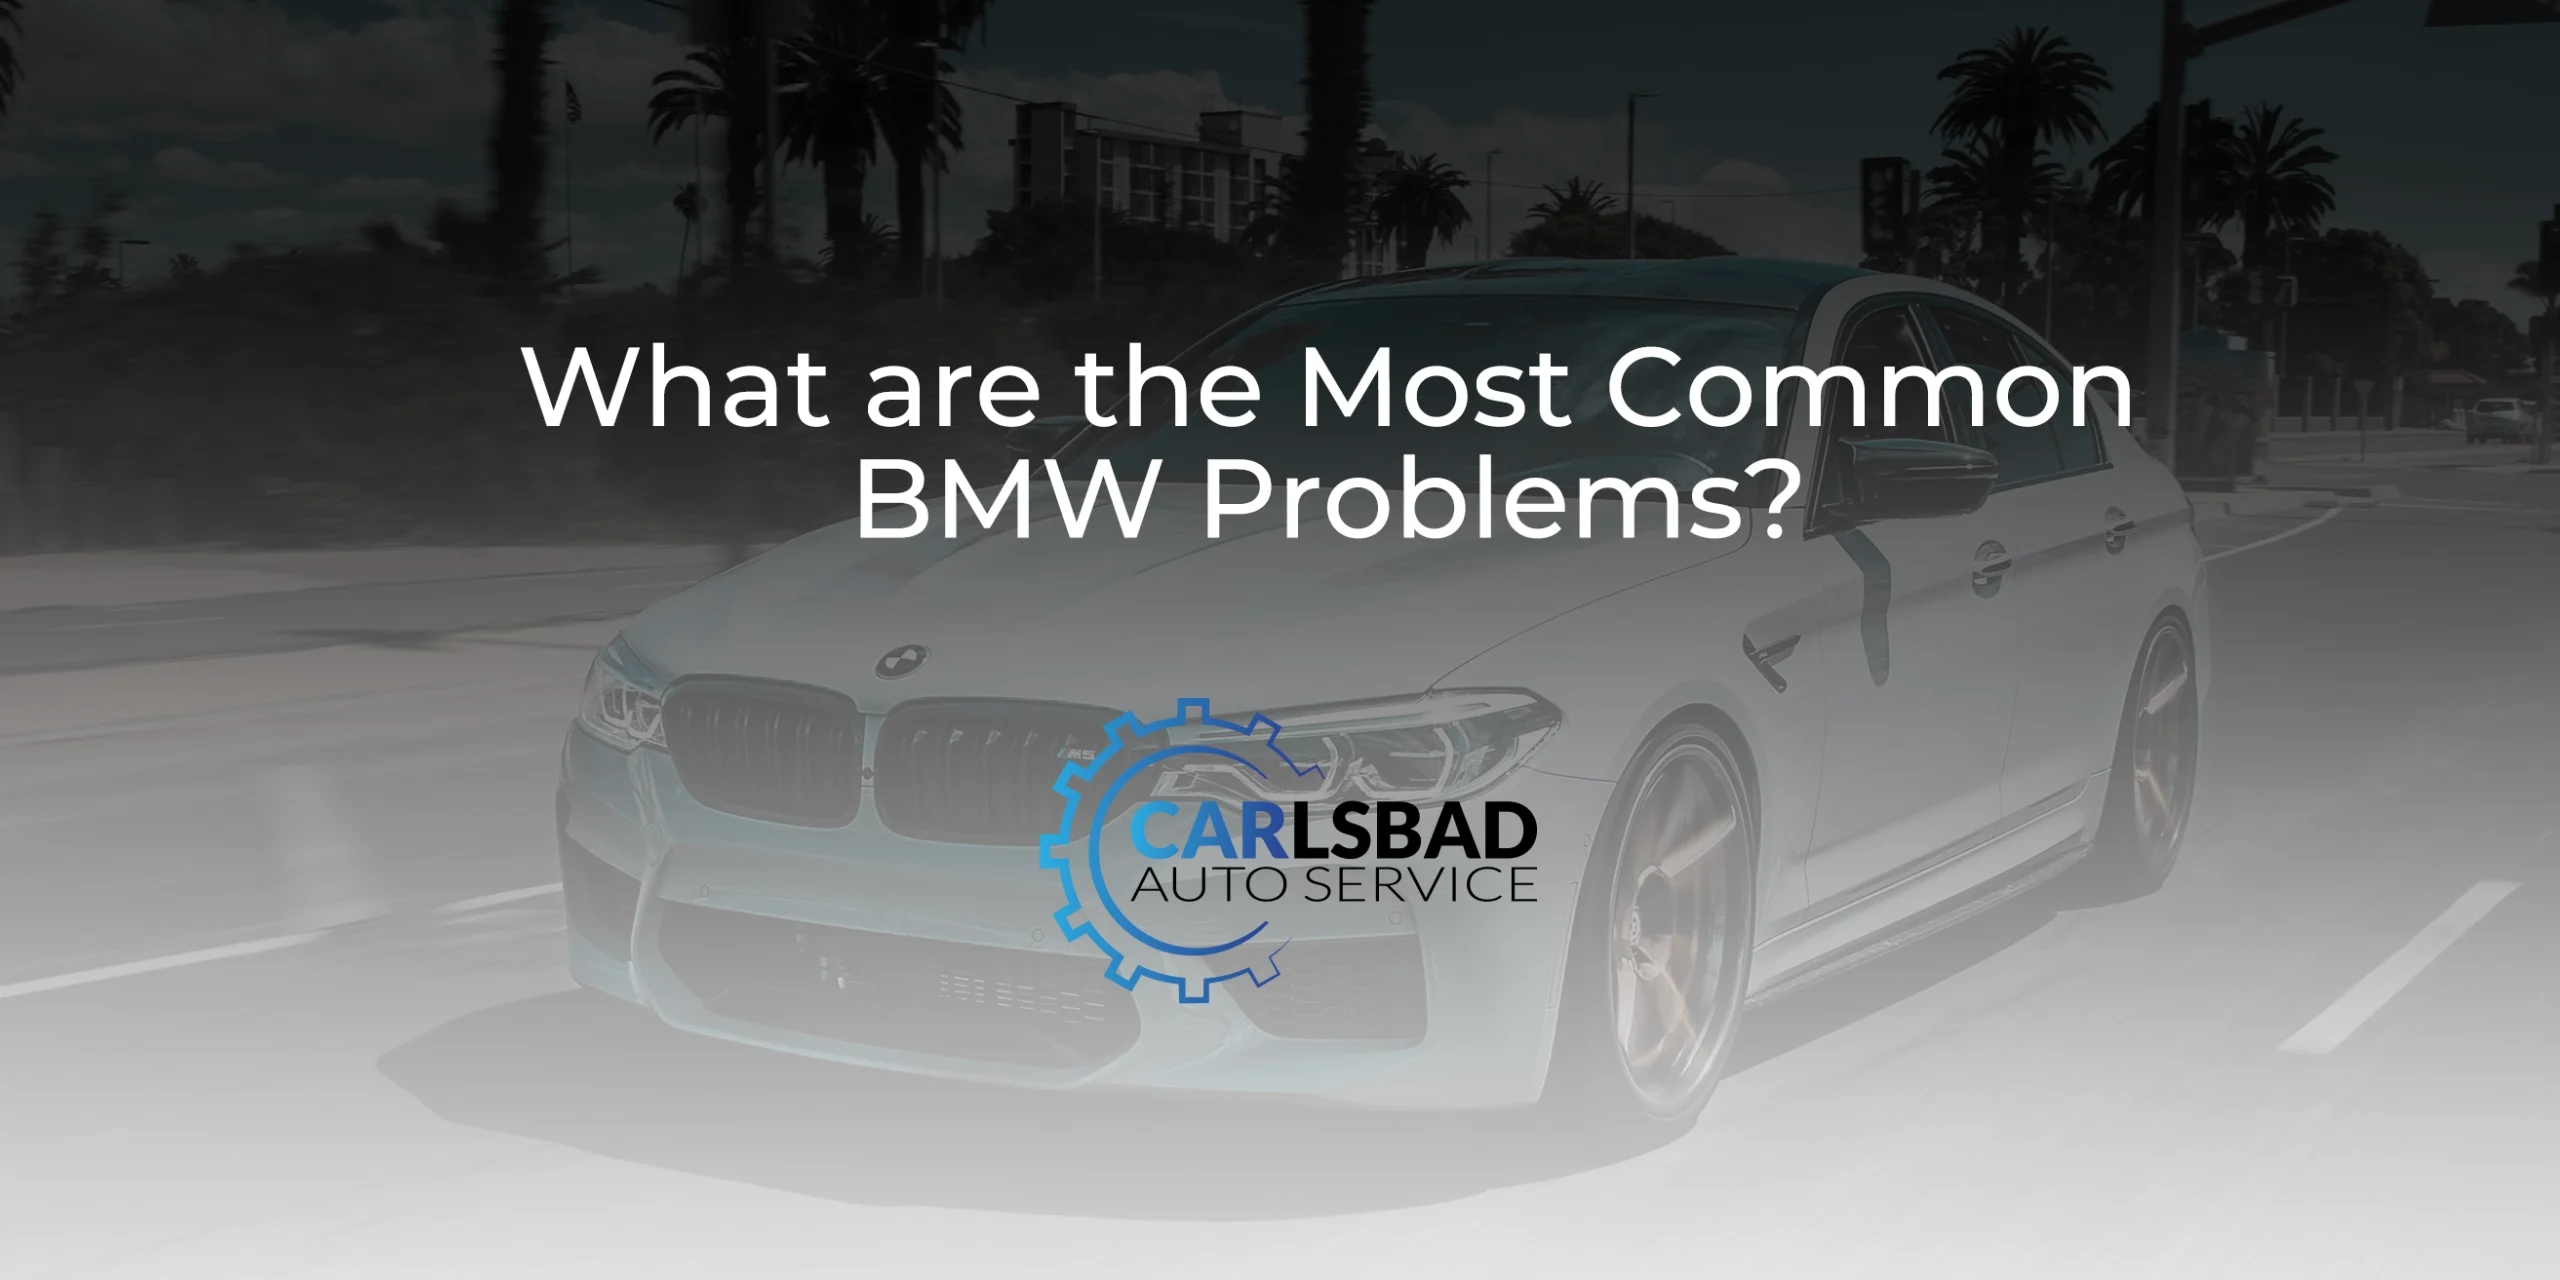 What are the Most Common BMW Problems?